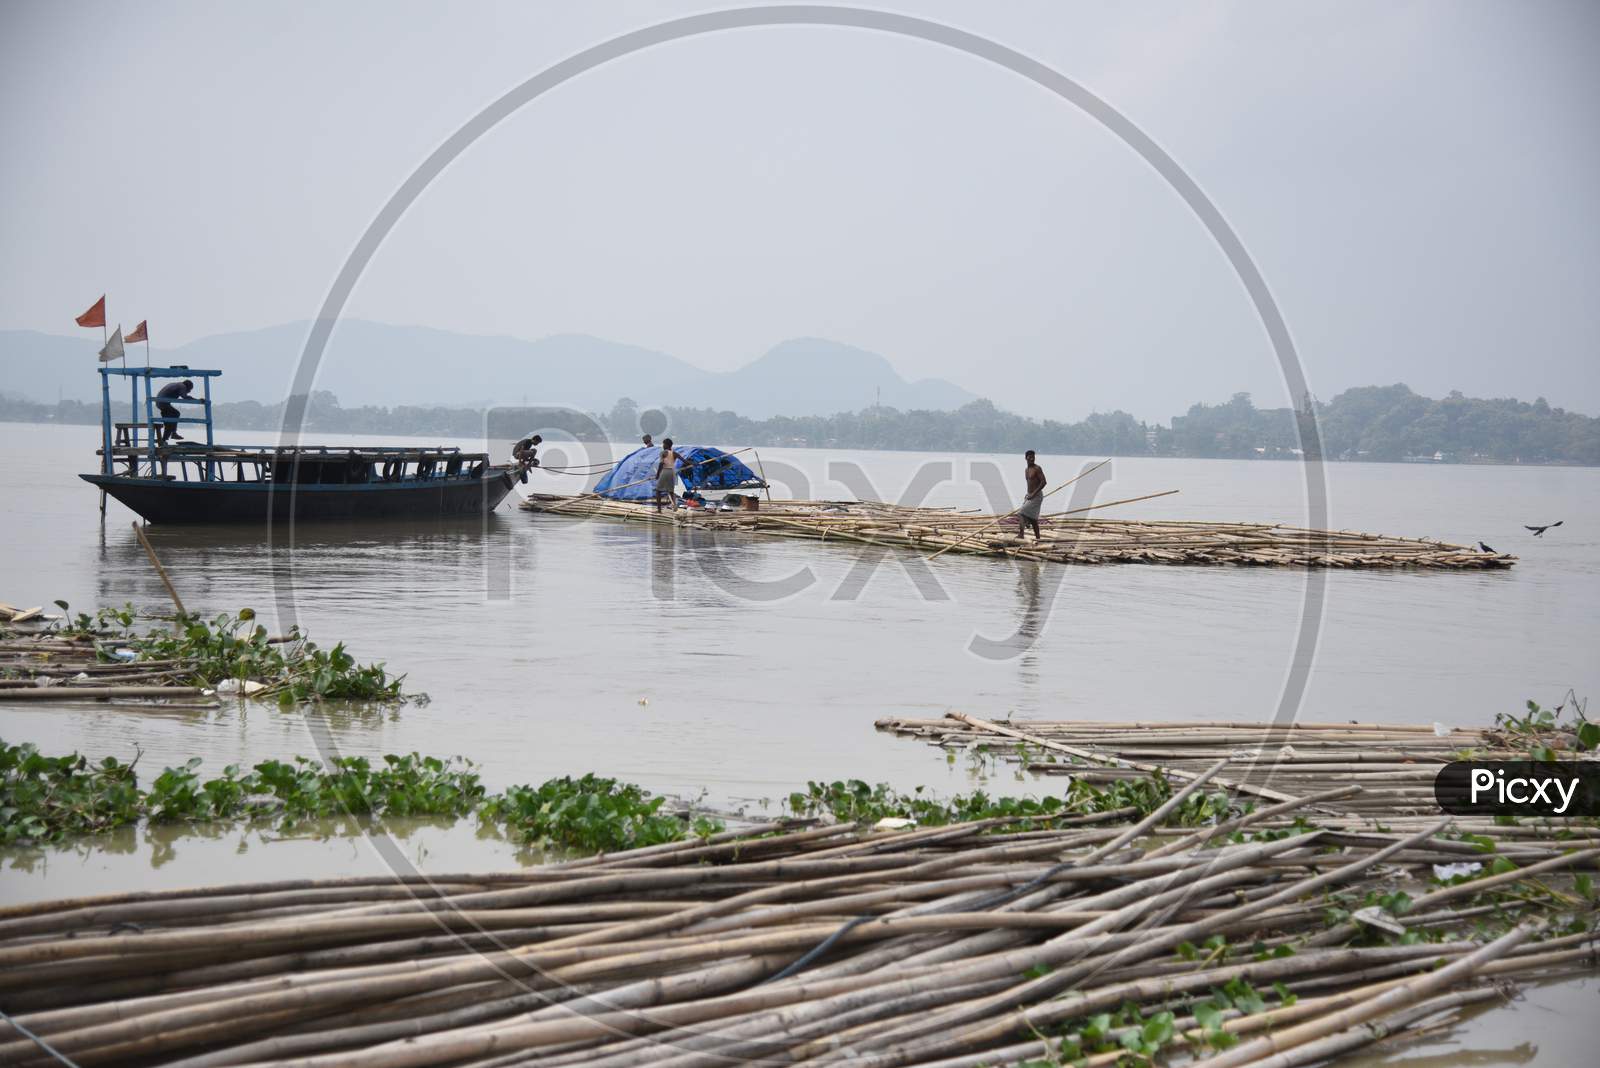 Laborers busy working at a wholesale Bamboo market alongside the banks of river Brahmaputra, in Guwahati on 11th September 2017